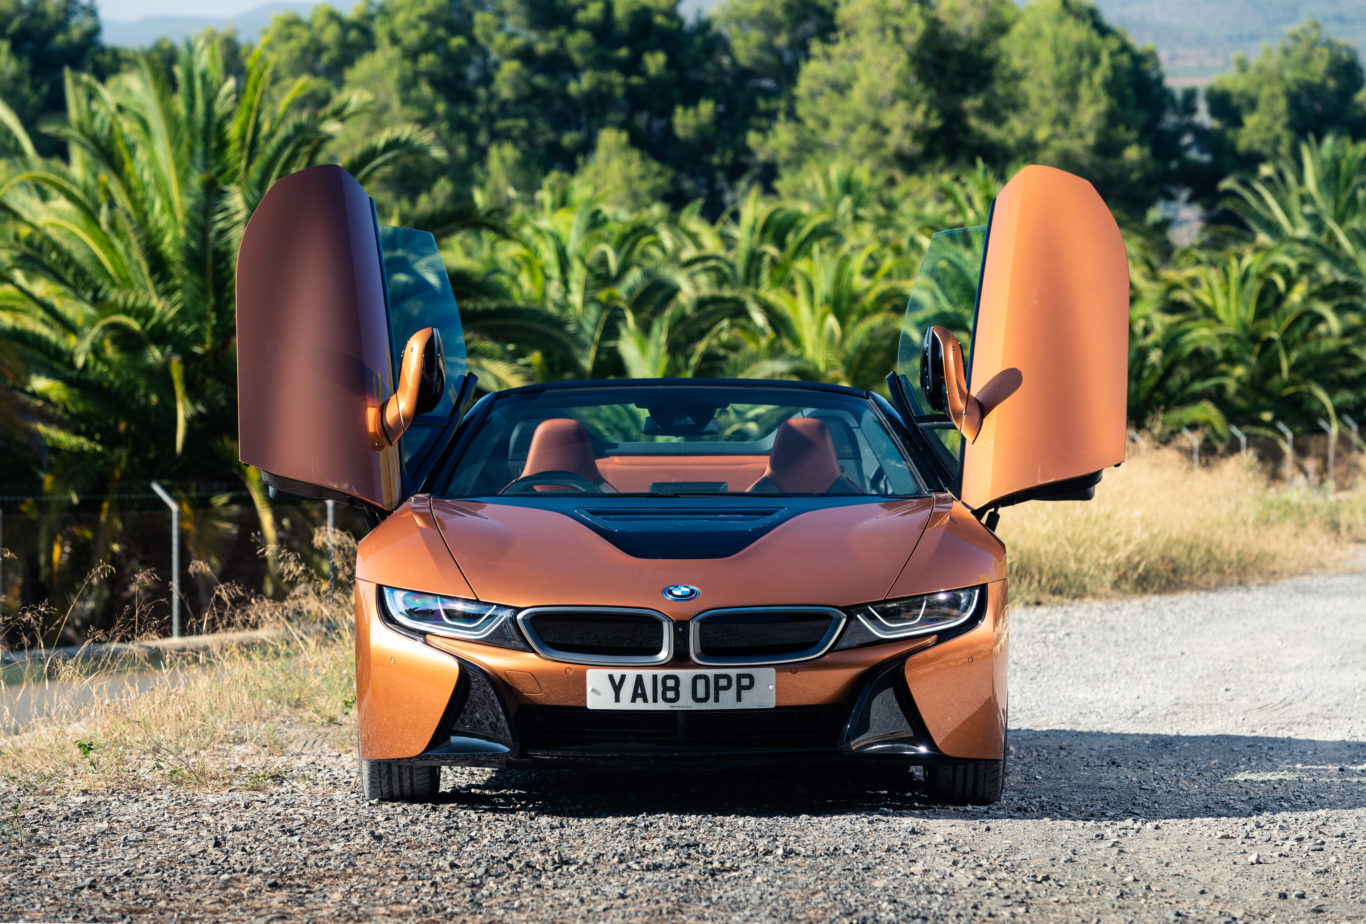 The Roadster retains the regular i8's iconic doors